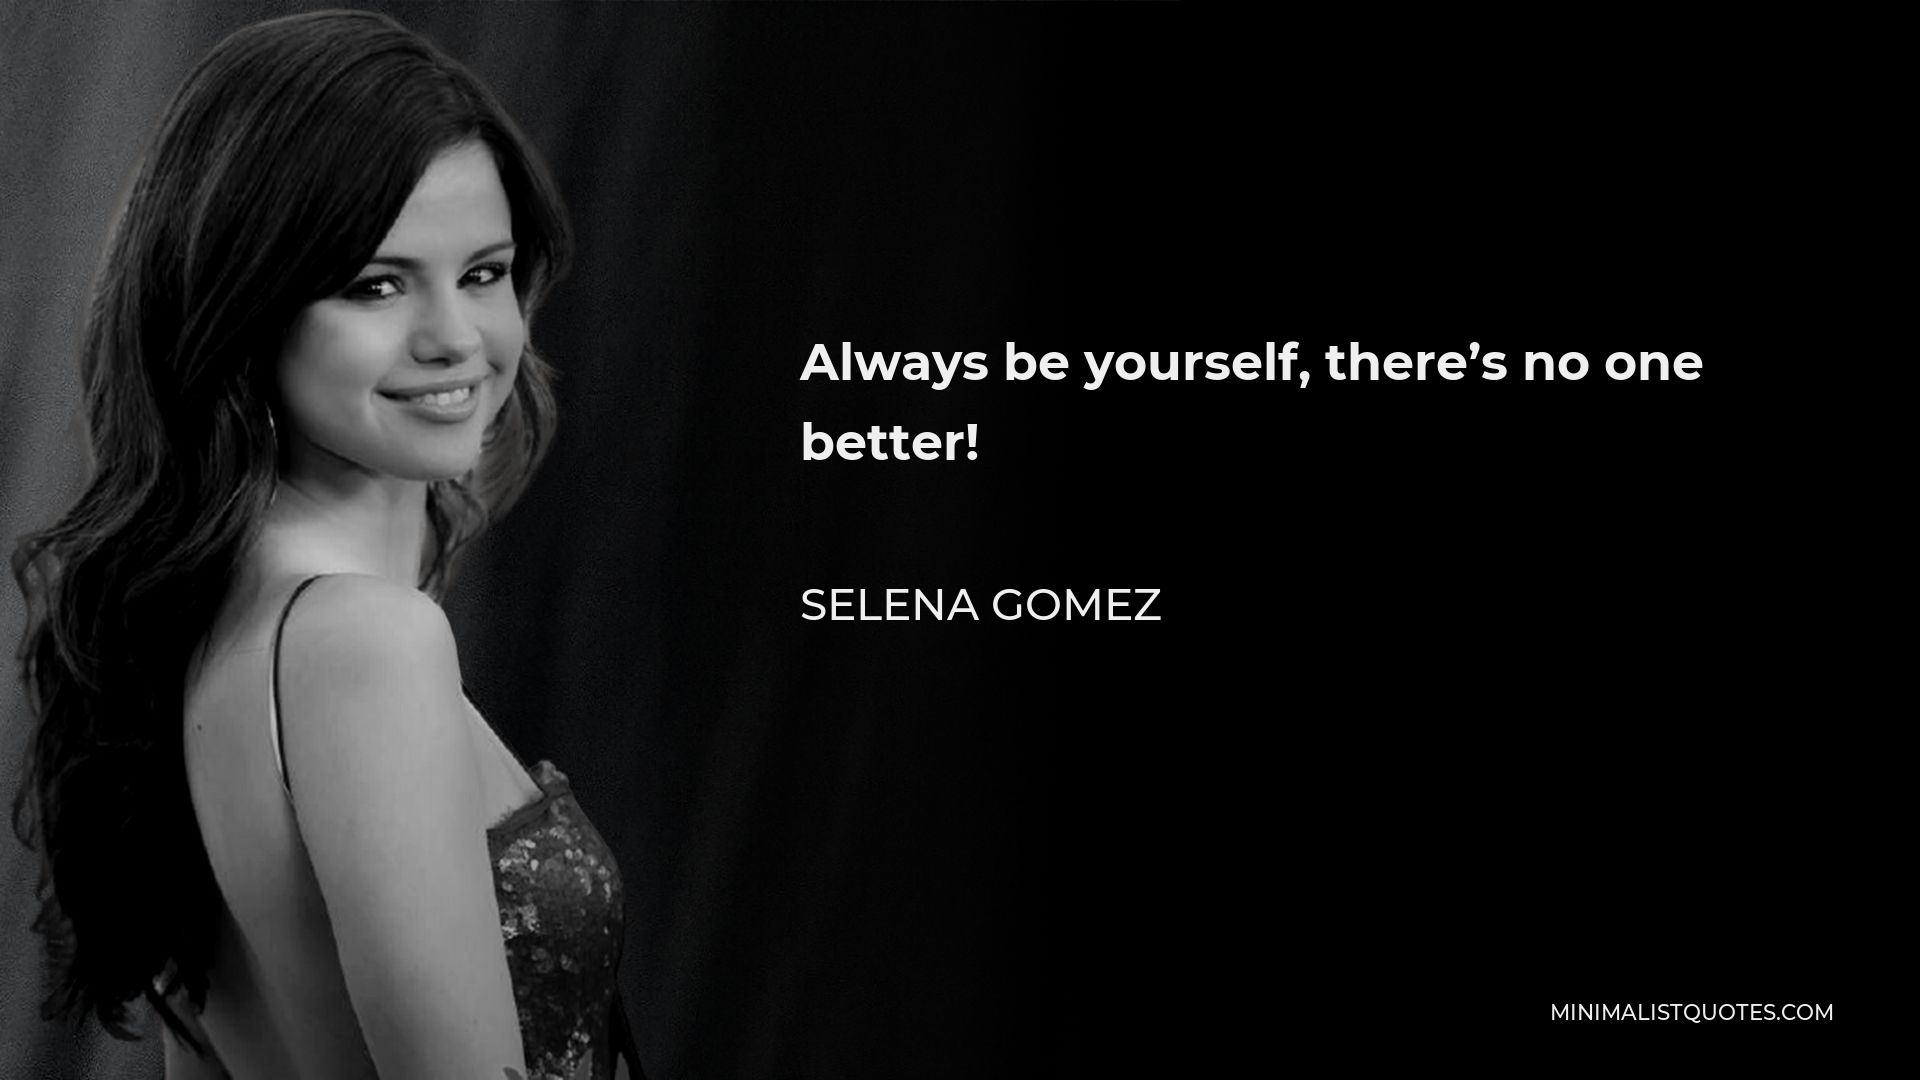 Selena Gomez Quote - Always be yourself, there’s no one better!